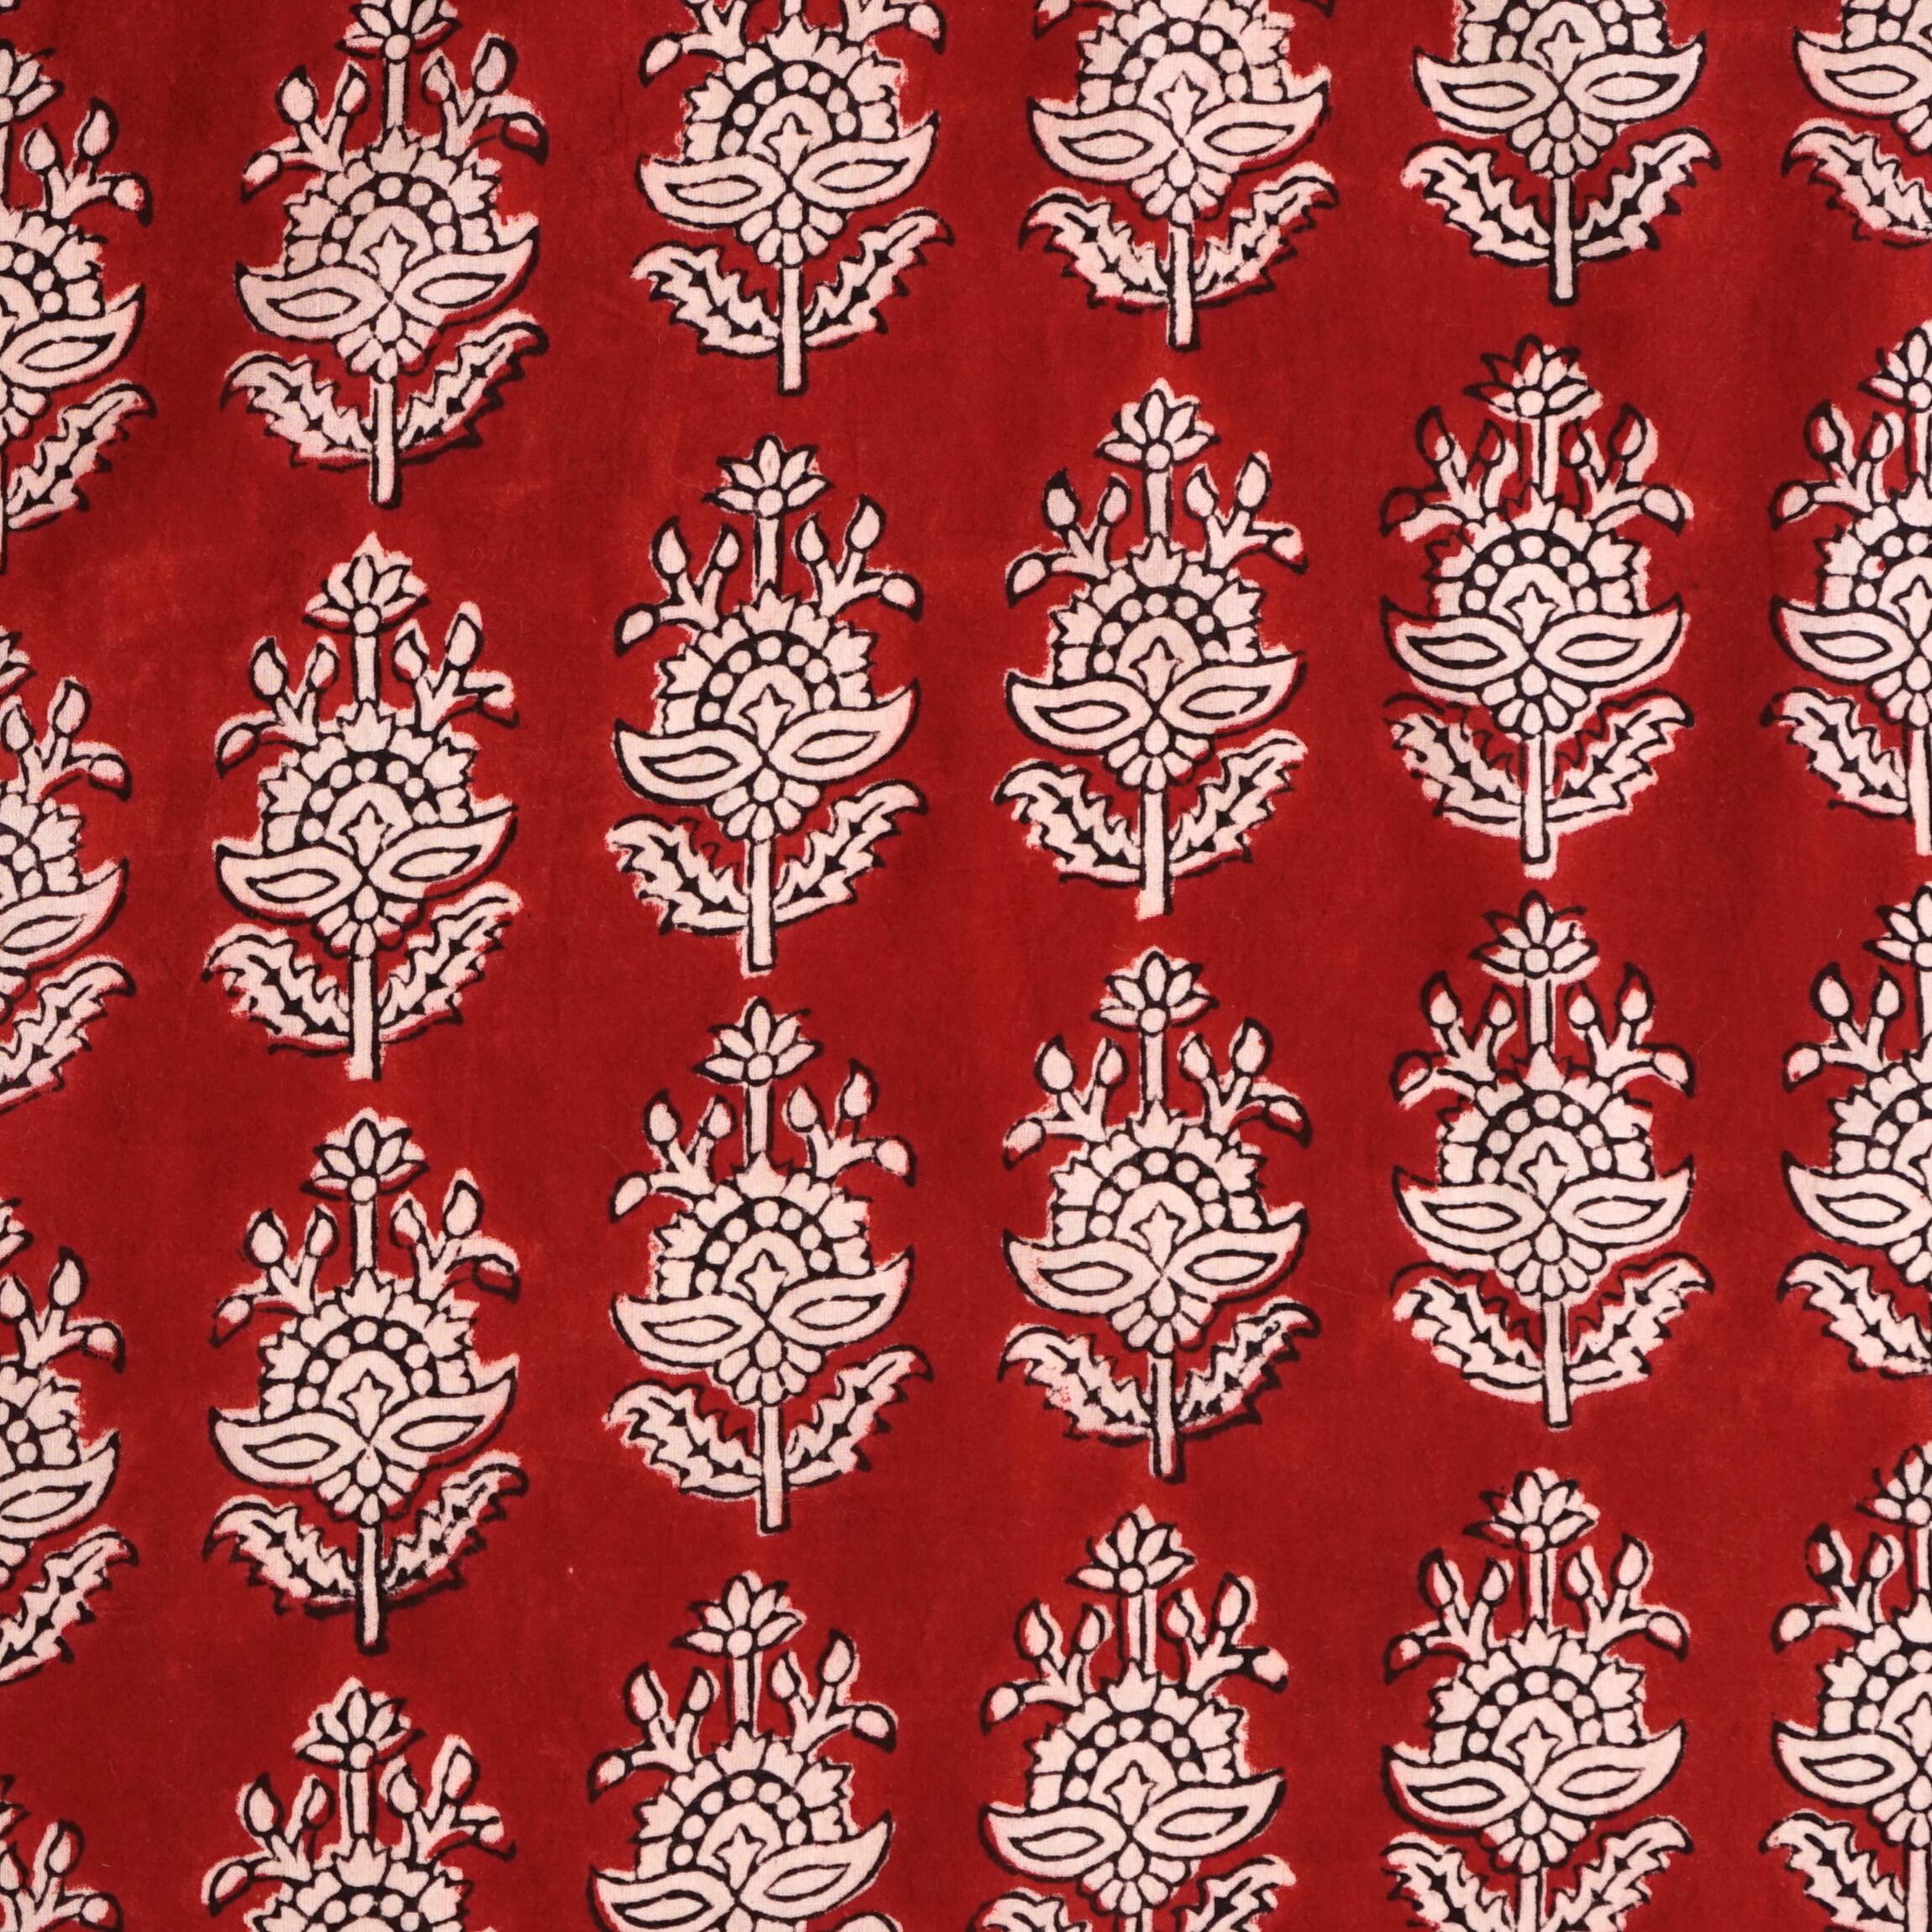 100% Block-Printed Cotton Fabric From India - Talkin' About Design - Iron Rust Black & Alizarin Red Dyes - Flat